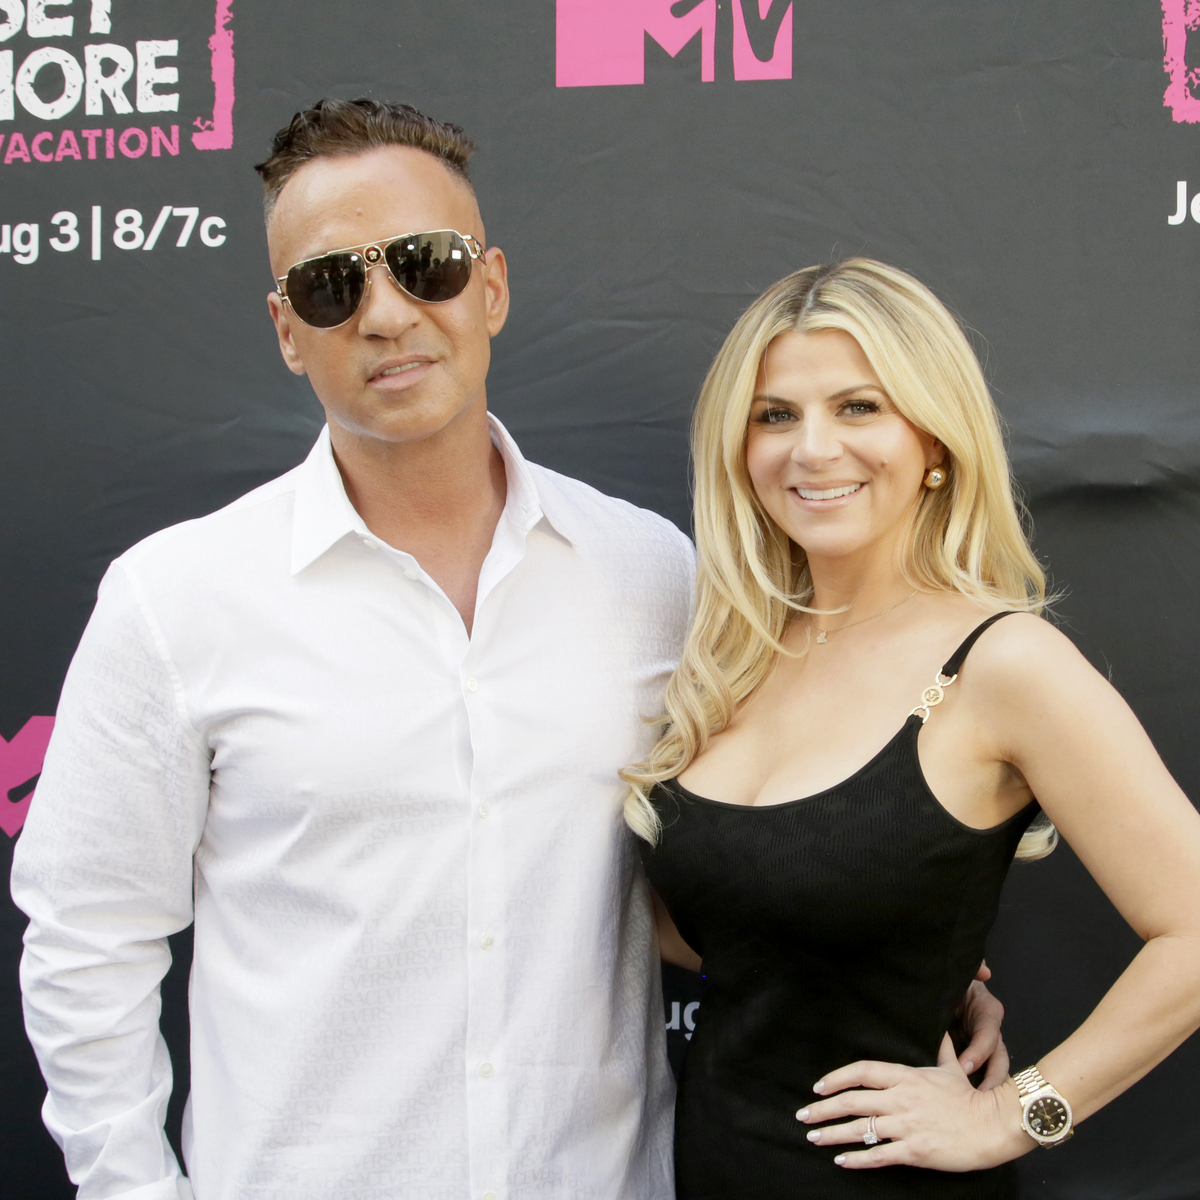 Mike 'The Situation' Sorrentino & Lauren Expecting Third Baby Together